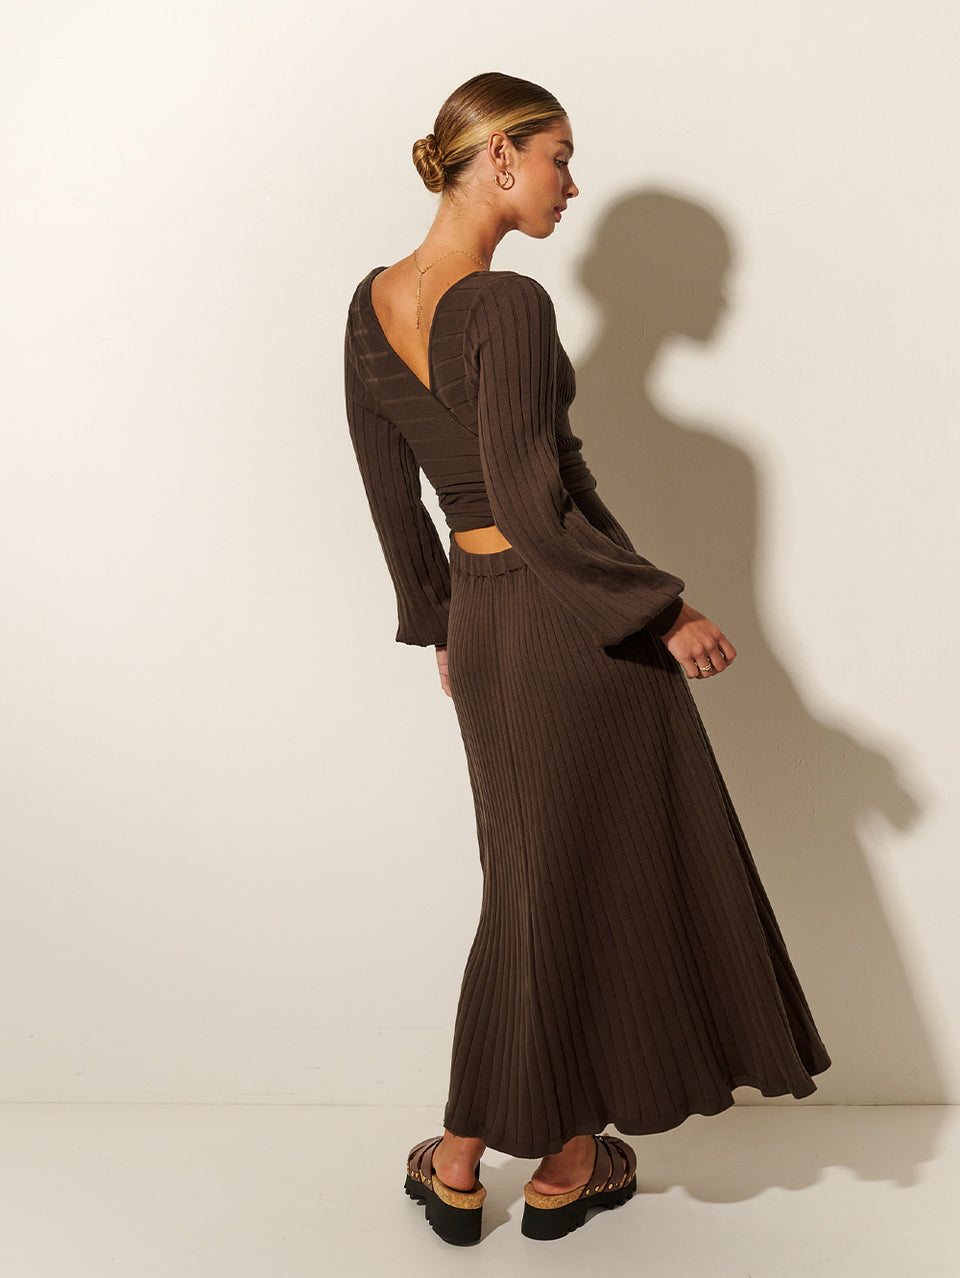 Back shot: Studio model wears the KIVARI Yolanda Long Sleeve Knit Dress - Chocolate: A rich brown reversible dress made from rib knit stitching with soft underbust seams, a tie-back feature with cut-out detail, full-length blouson sleeves and an A-line skirt.